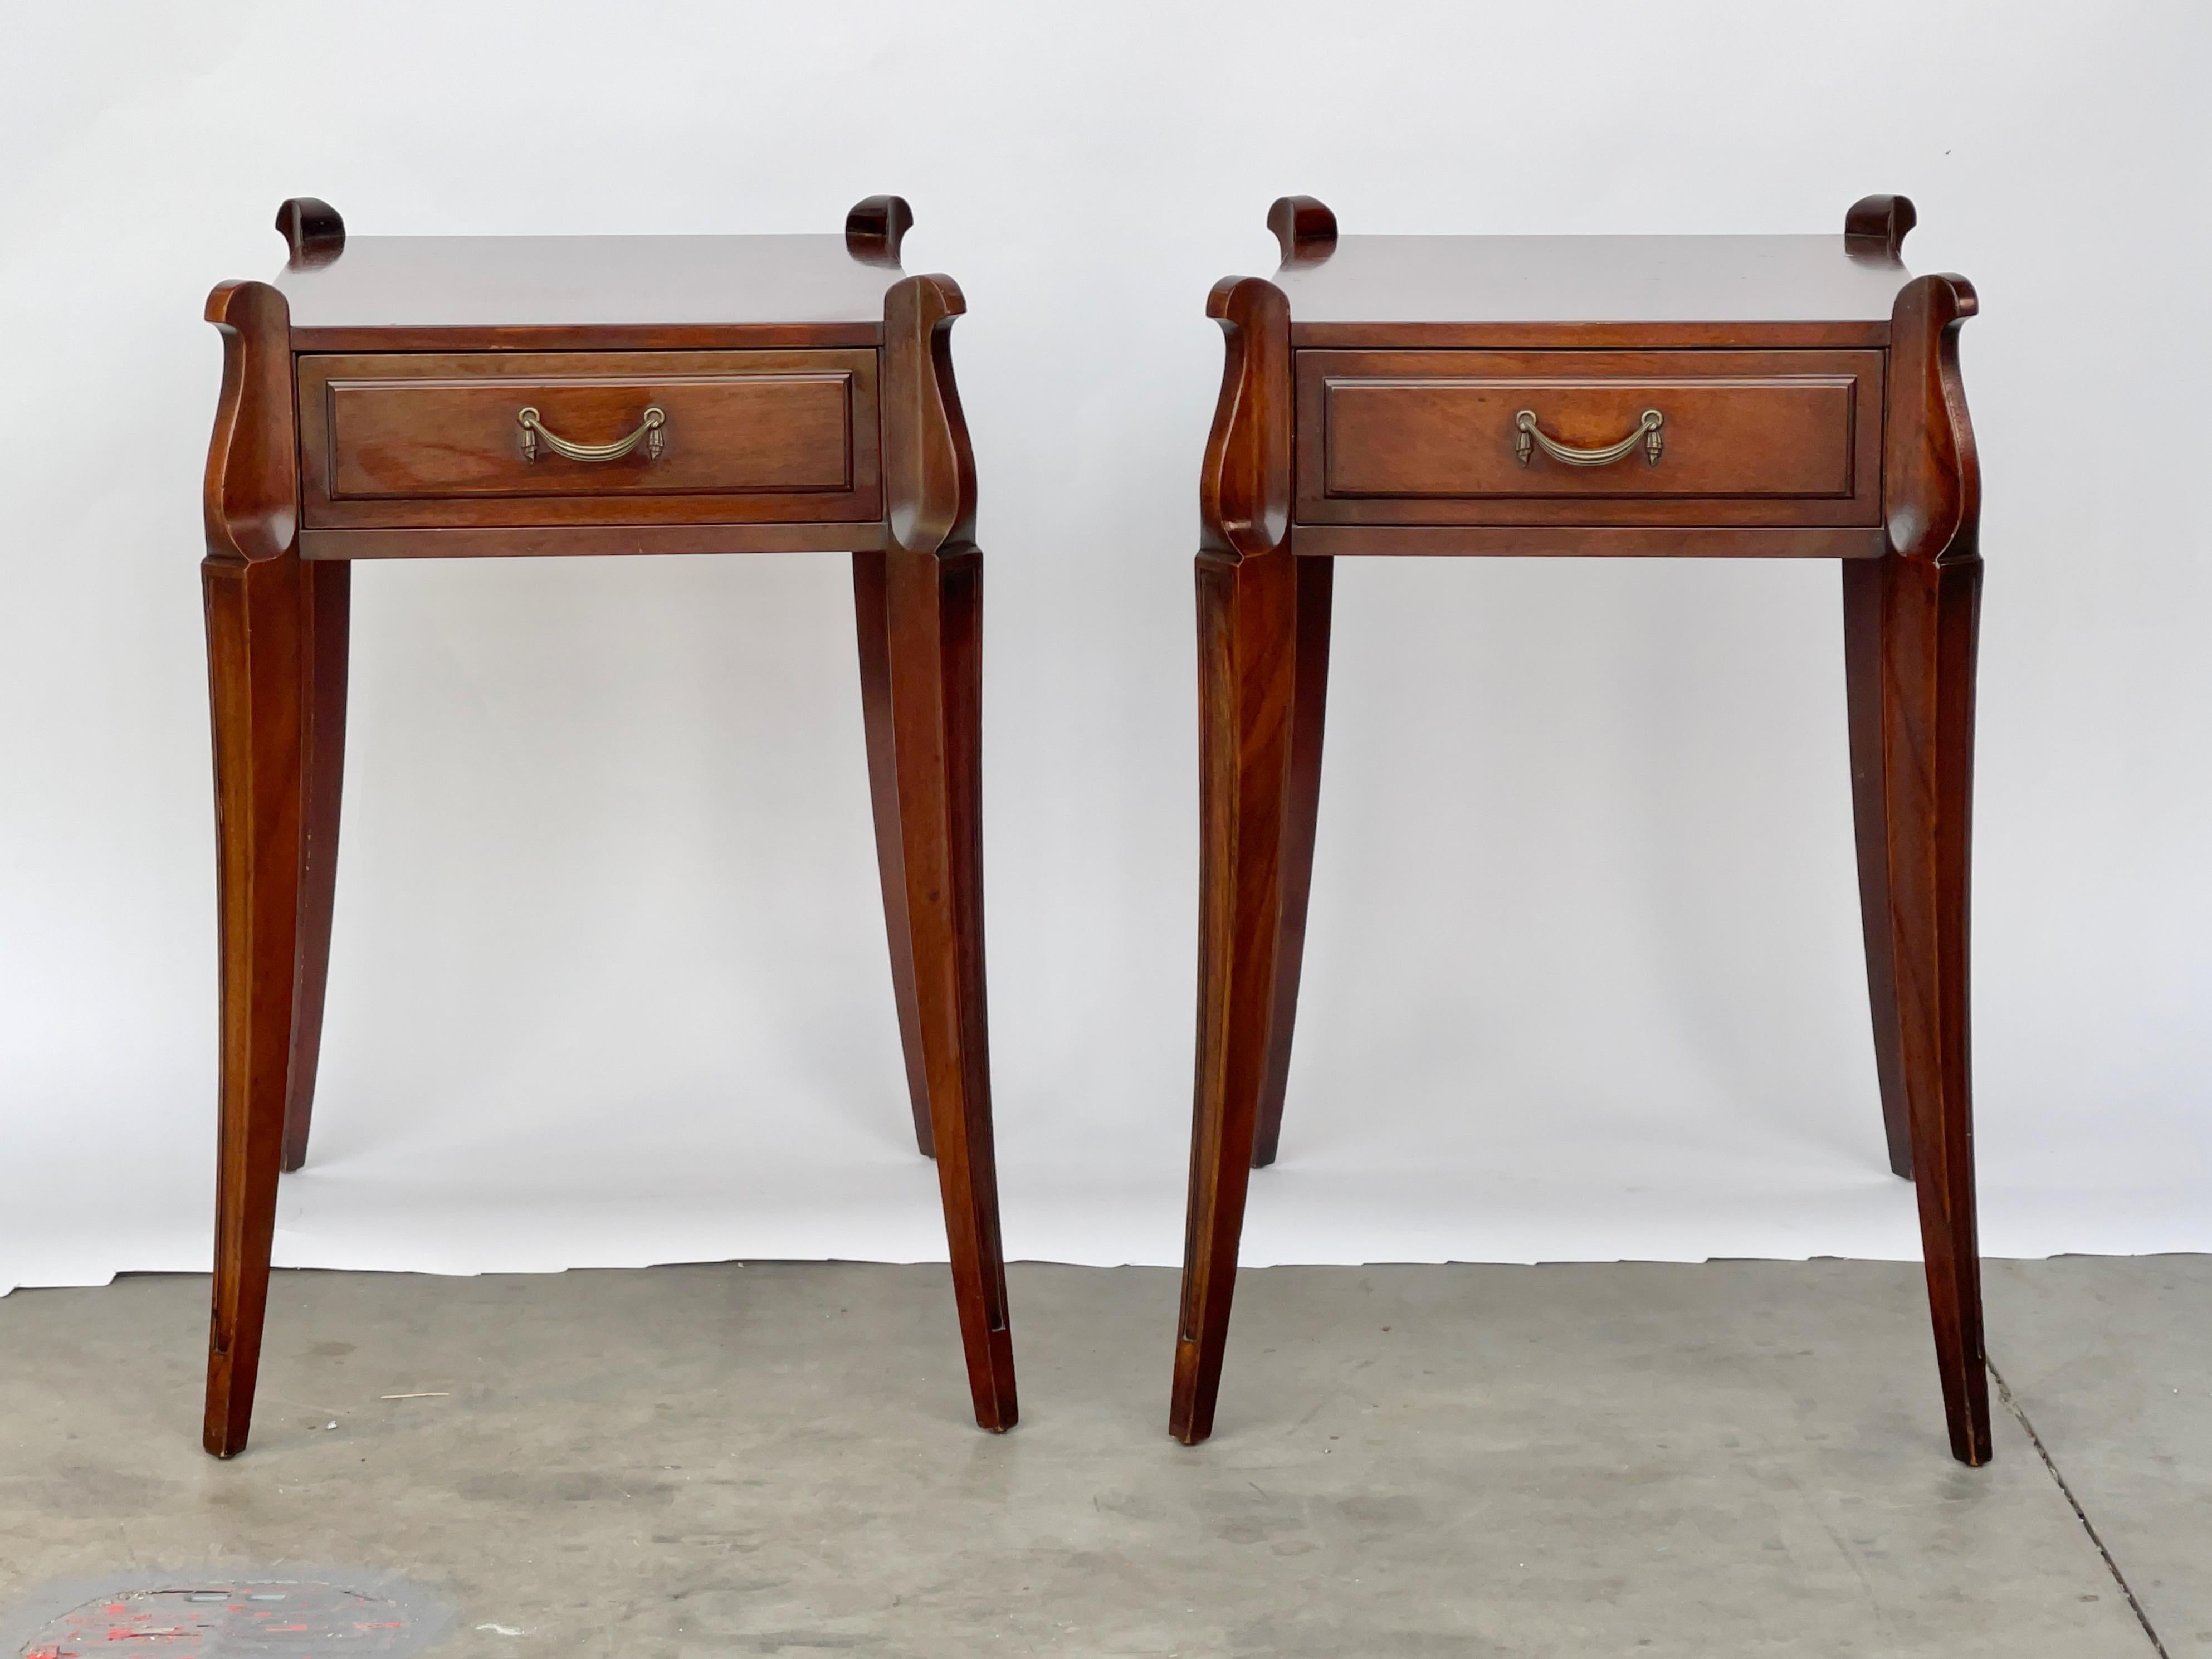 Pair of Grosfeld House no. 3726A mahogany end tables. 
Single drawer with bronze draped pull. 
False drawer on backside. 
Dimensions of rectangular top excluding legs is 27 inches by 16 inches.
Grosfeld House produced highly stylish designs